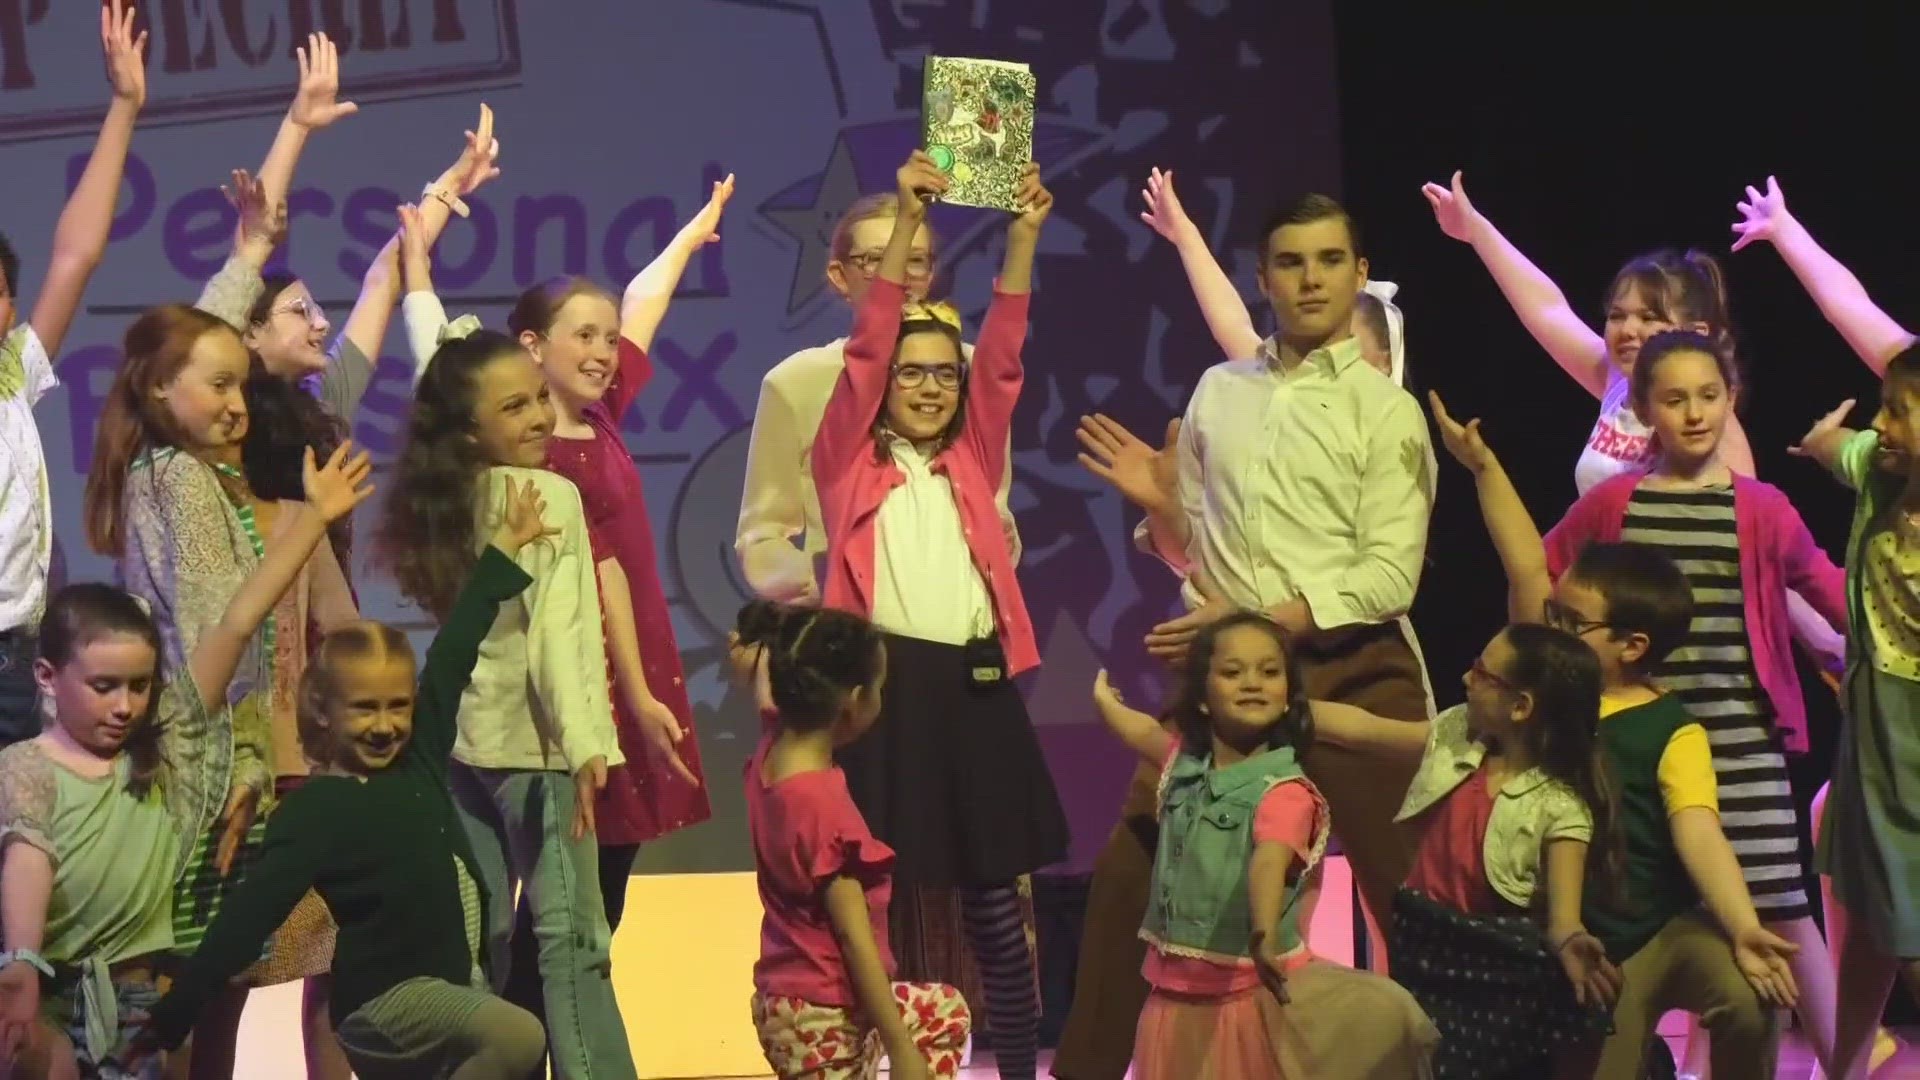 Pickerington Community Theatre returns to the stage this weekend with a children's musical based on a beloved book series by author Barbar Park.